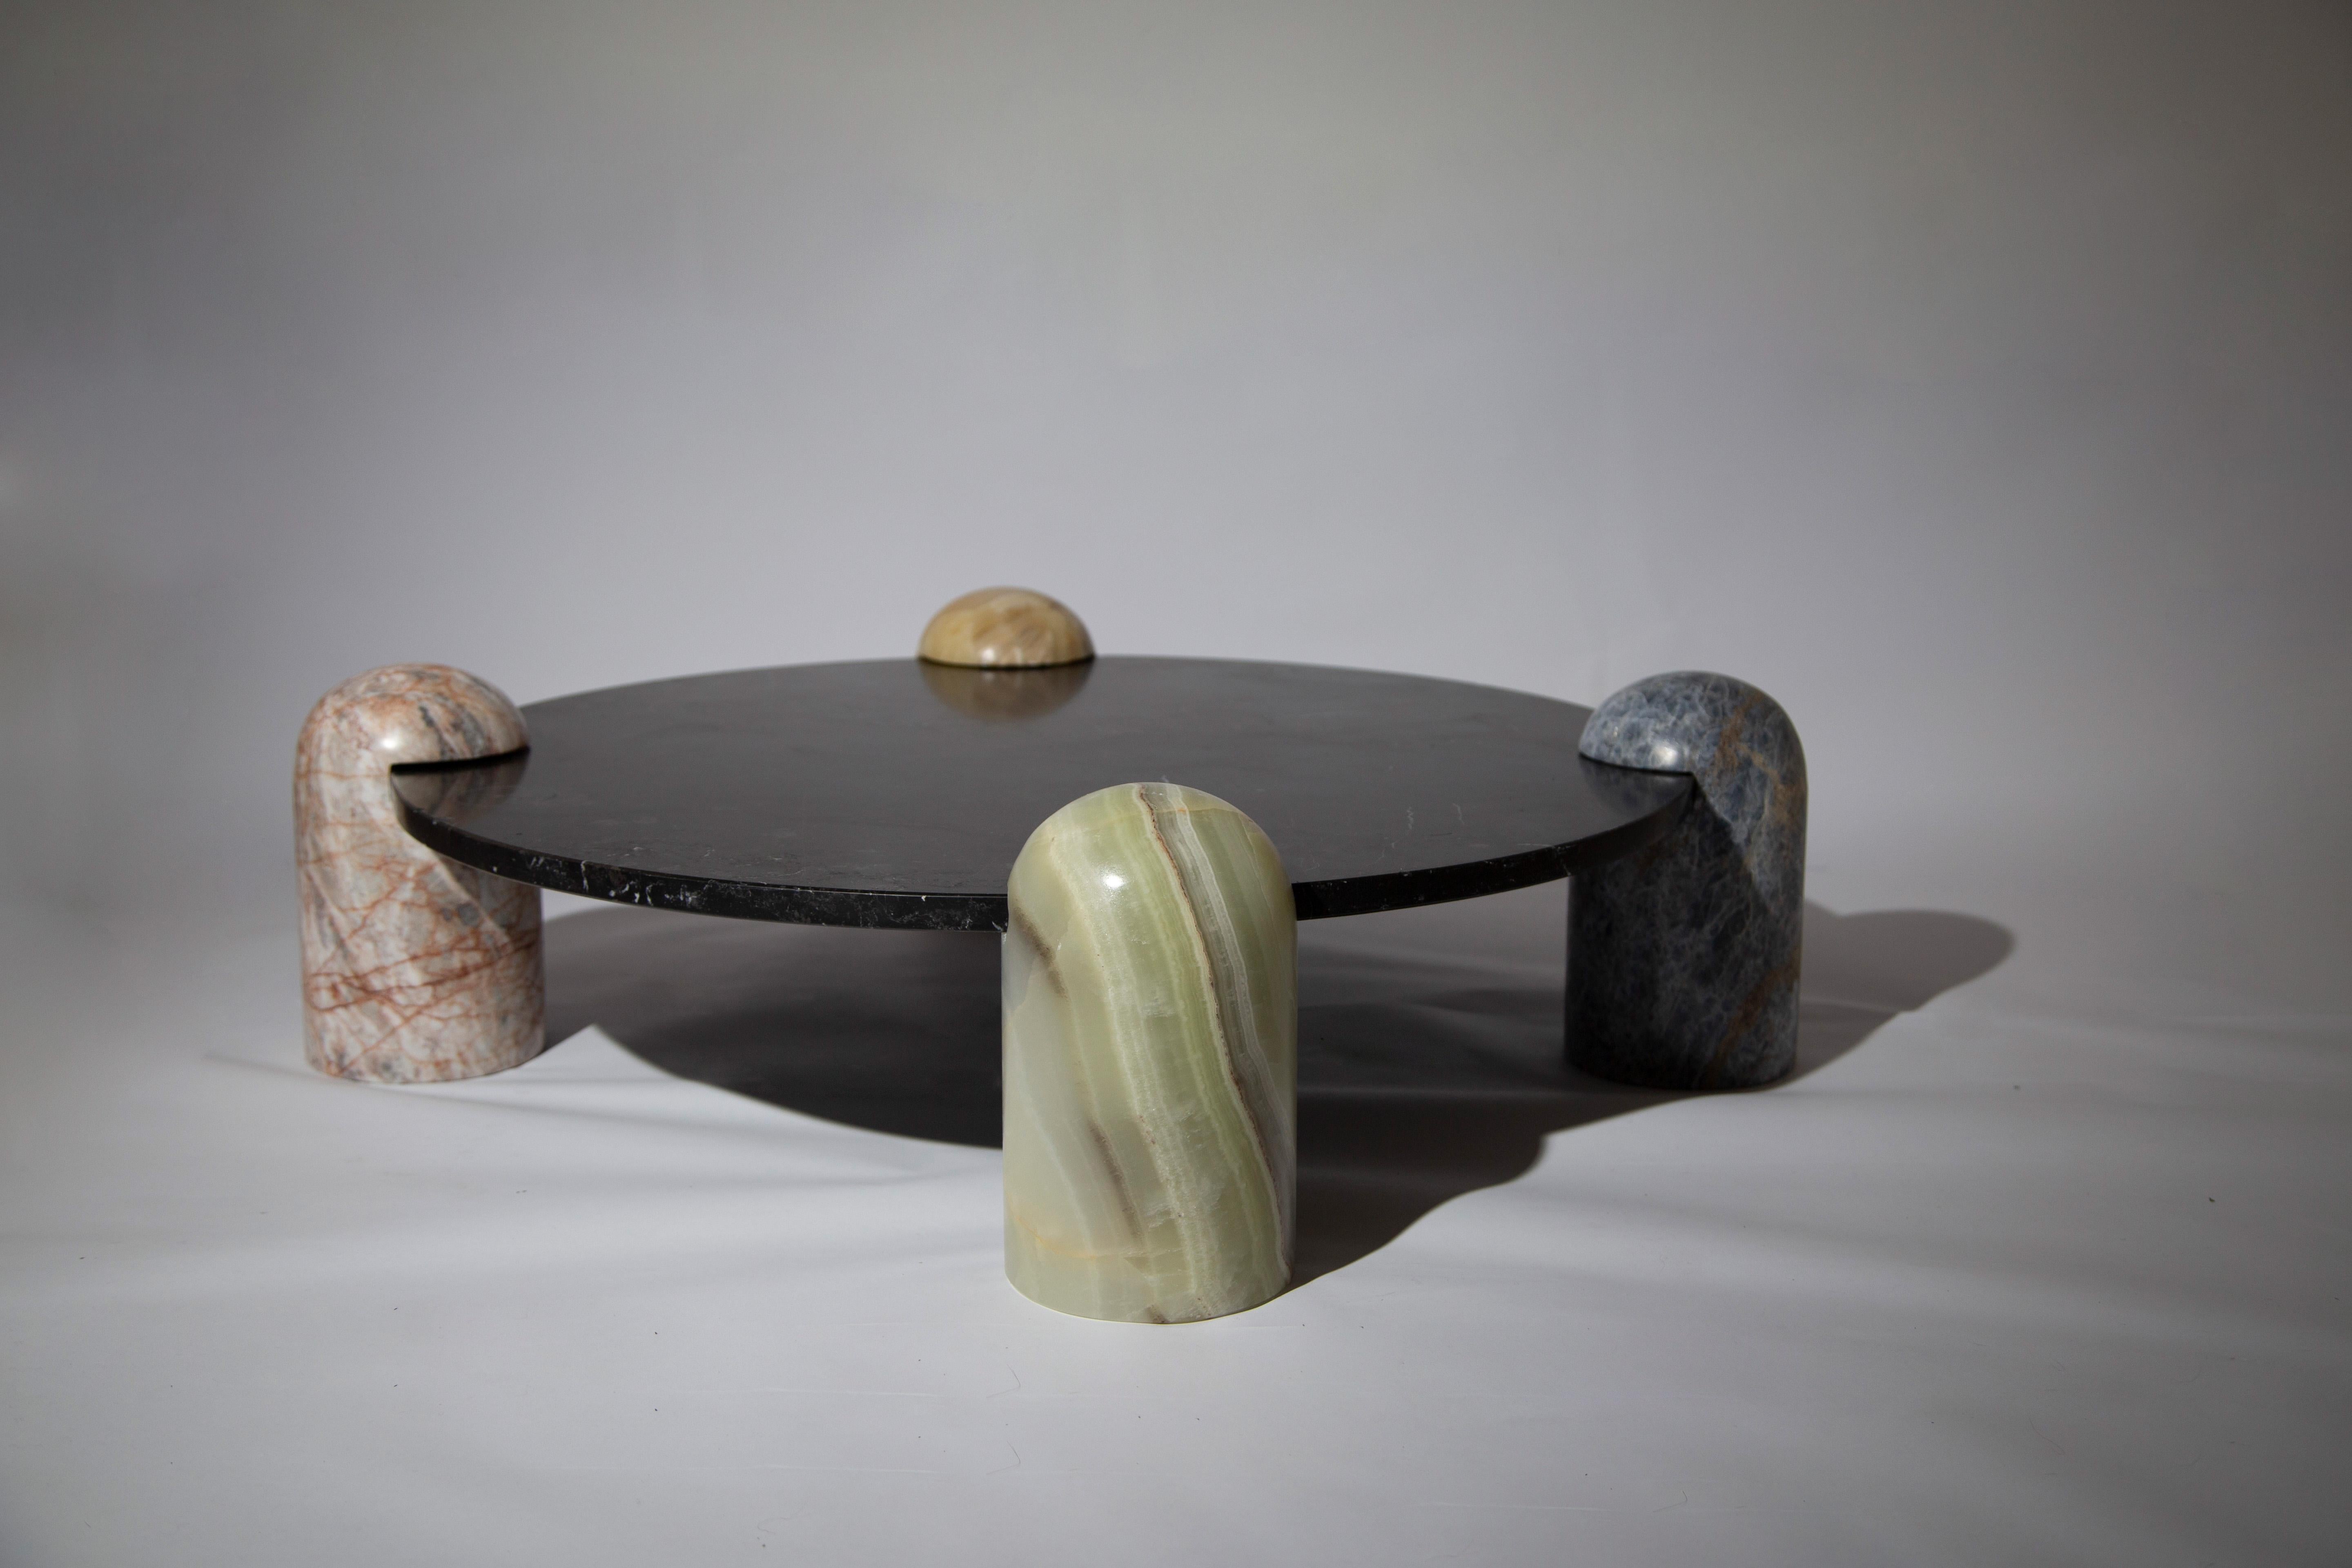 Toy Coffee Table by Panorammma
Dimensions: ⌀ 70 x H 40 cm
Materials: Blue Calacite, Pink and Black Monterrey Marble, Caramel and Green Onyx


Rounded pillars of blue calcite, pink marble, caramel onyx and green onyx carry a black marble top to